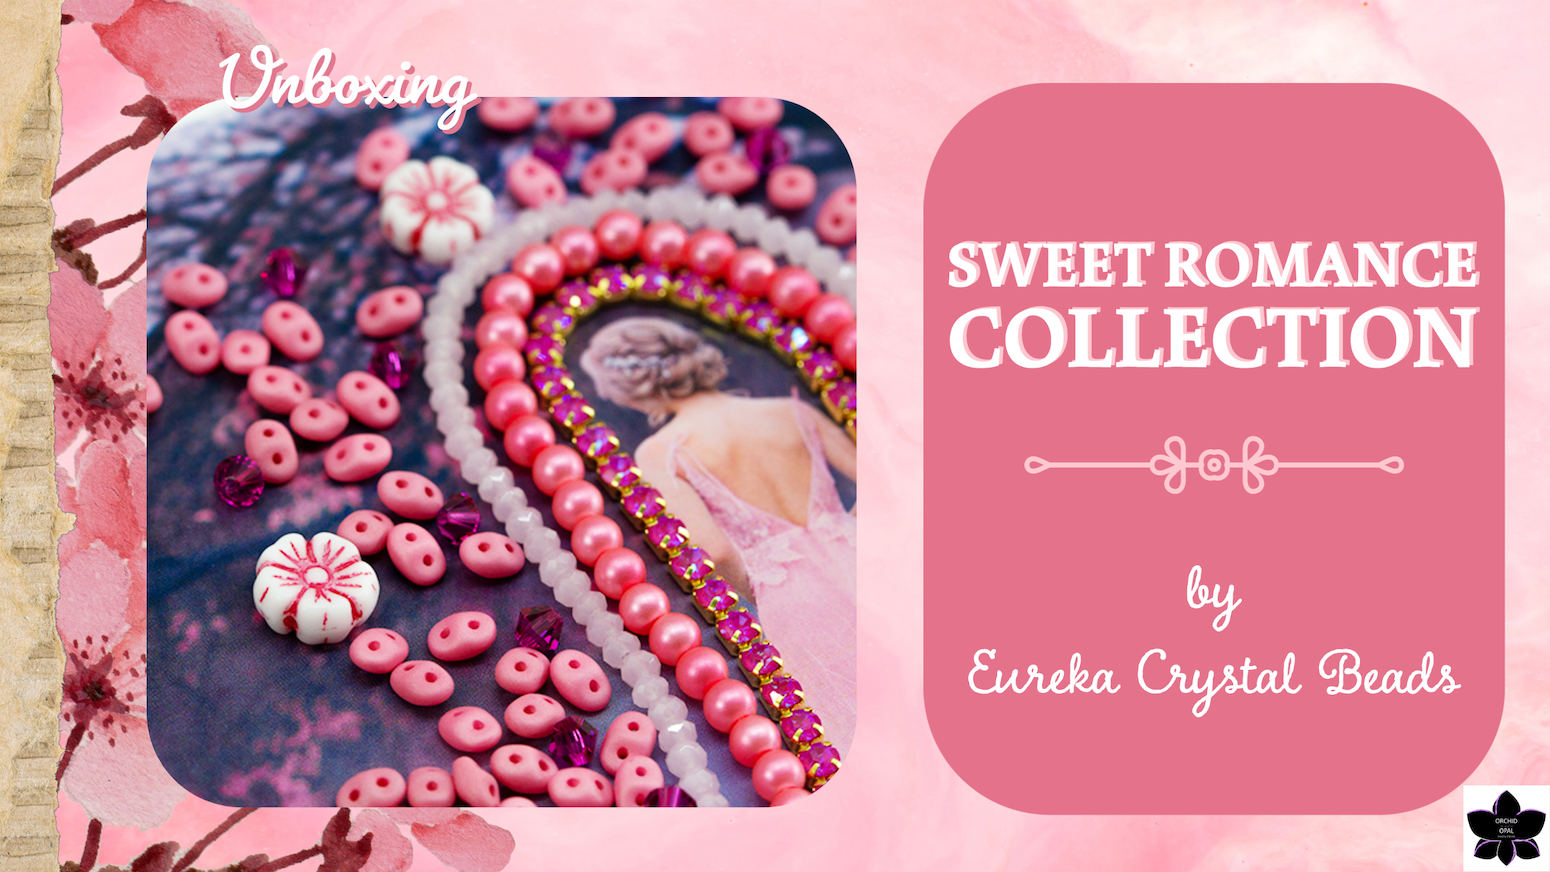 Sweet Romance Collection by Eureka Crystal Beads